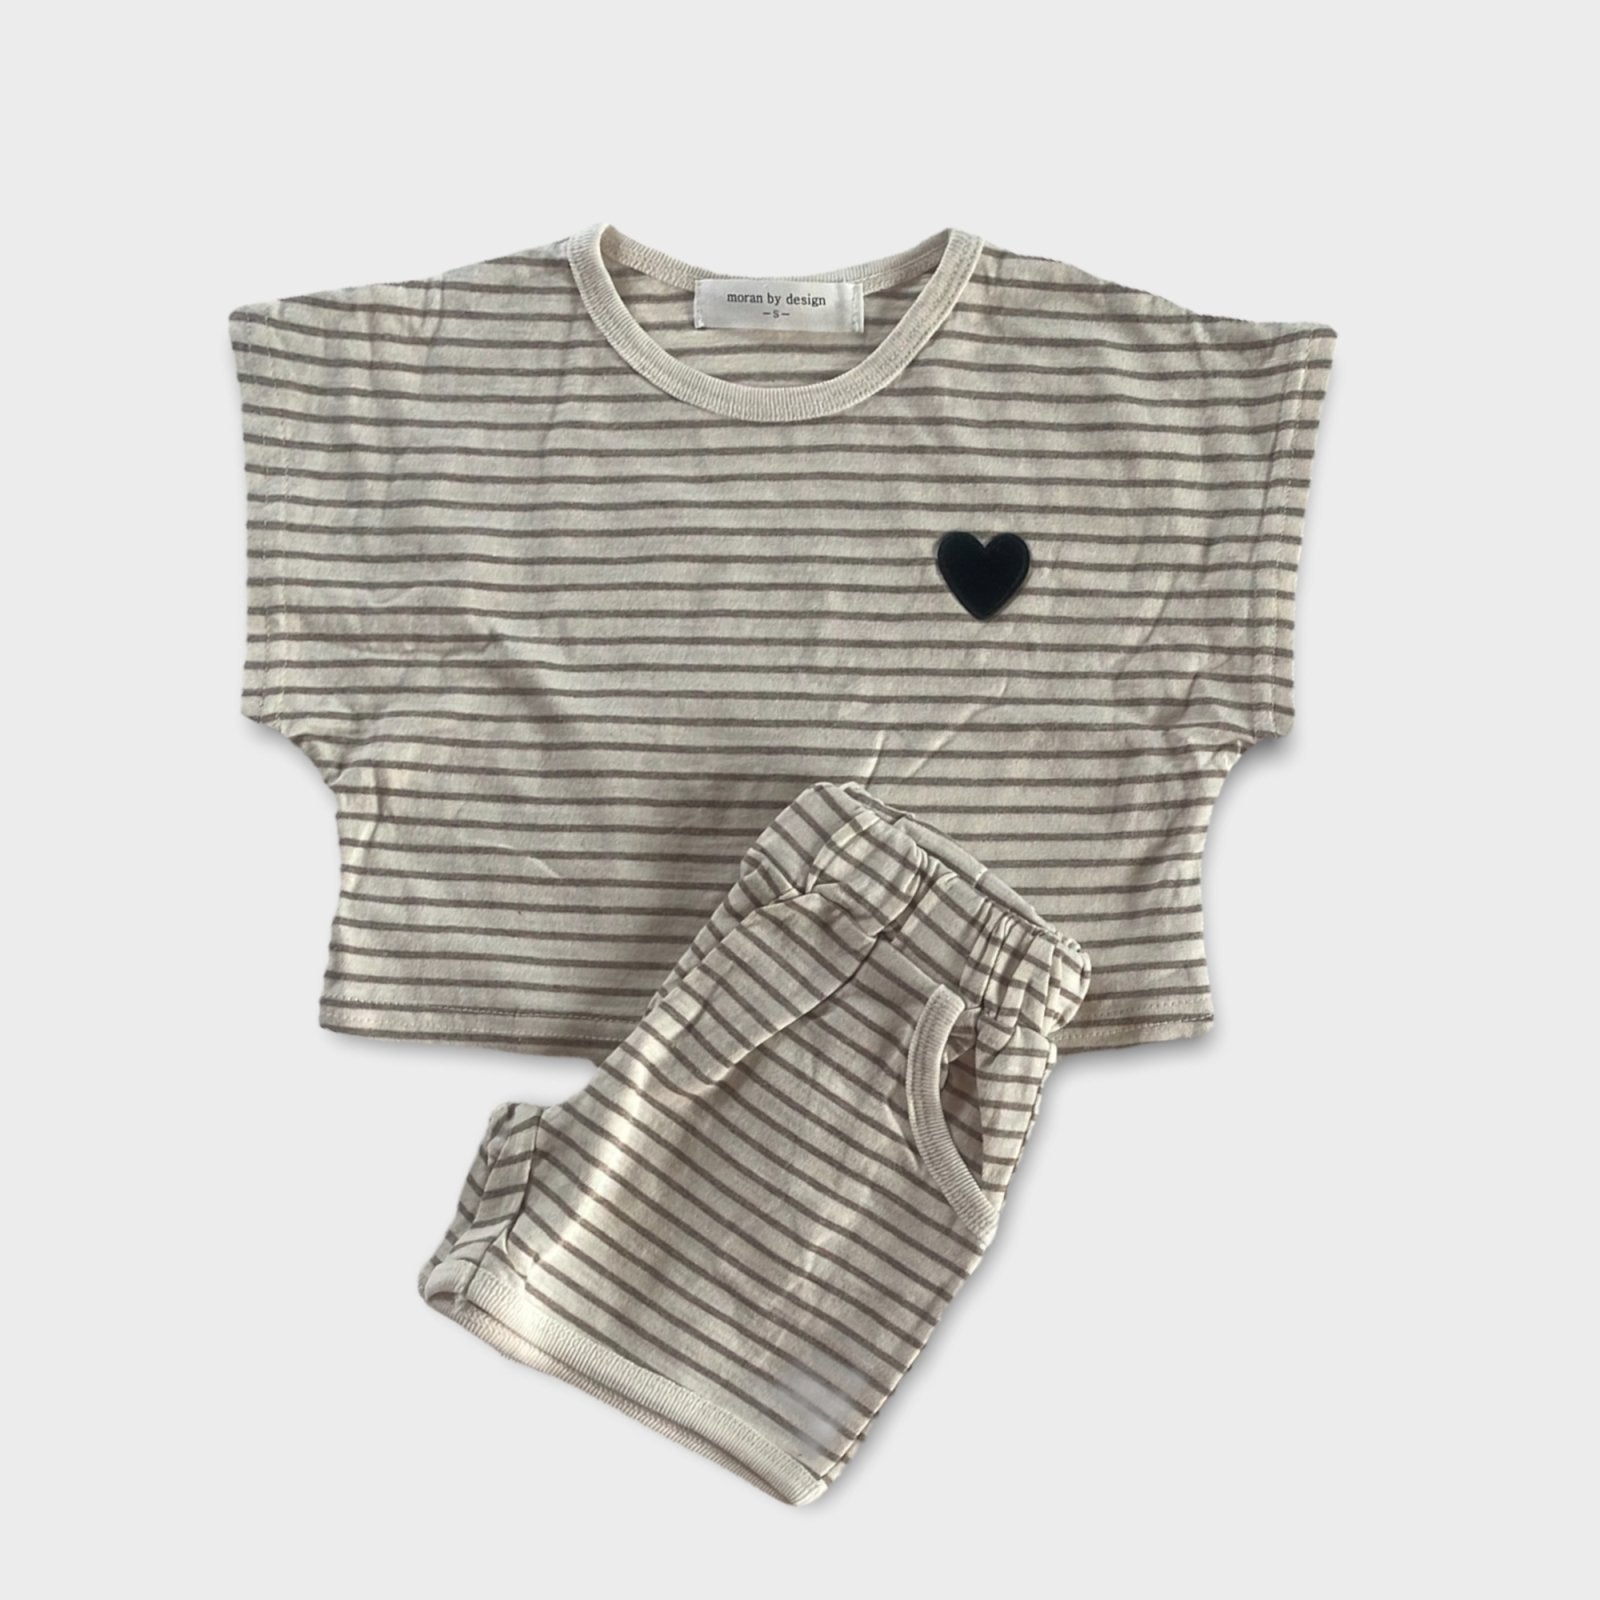 Mini Heart Set find Stylish Fashion for Little People- at Little Foxx Concept Store